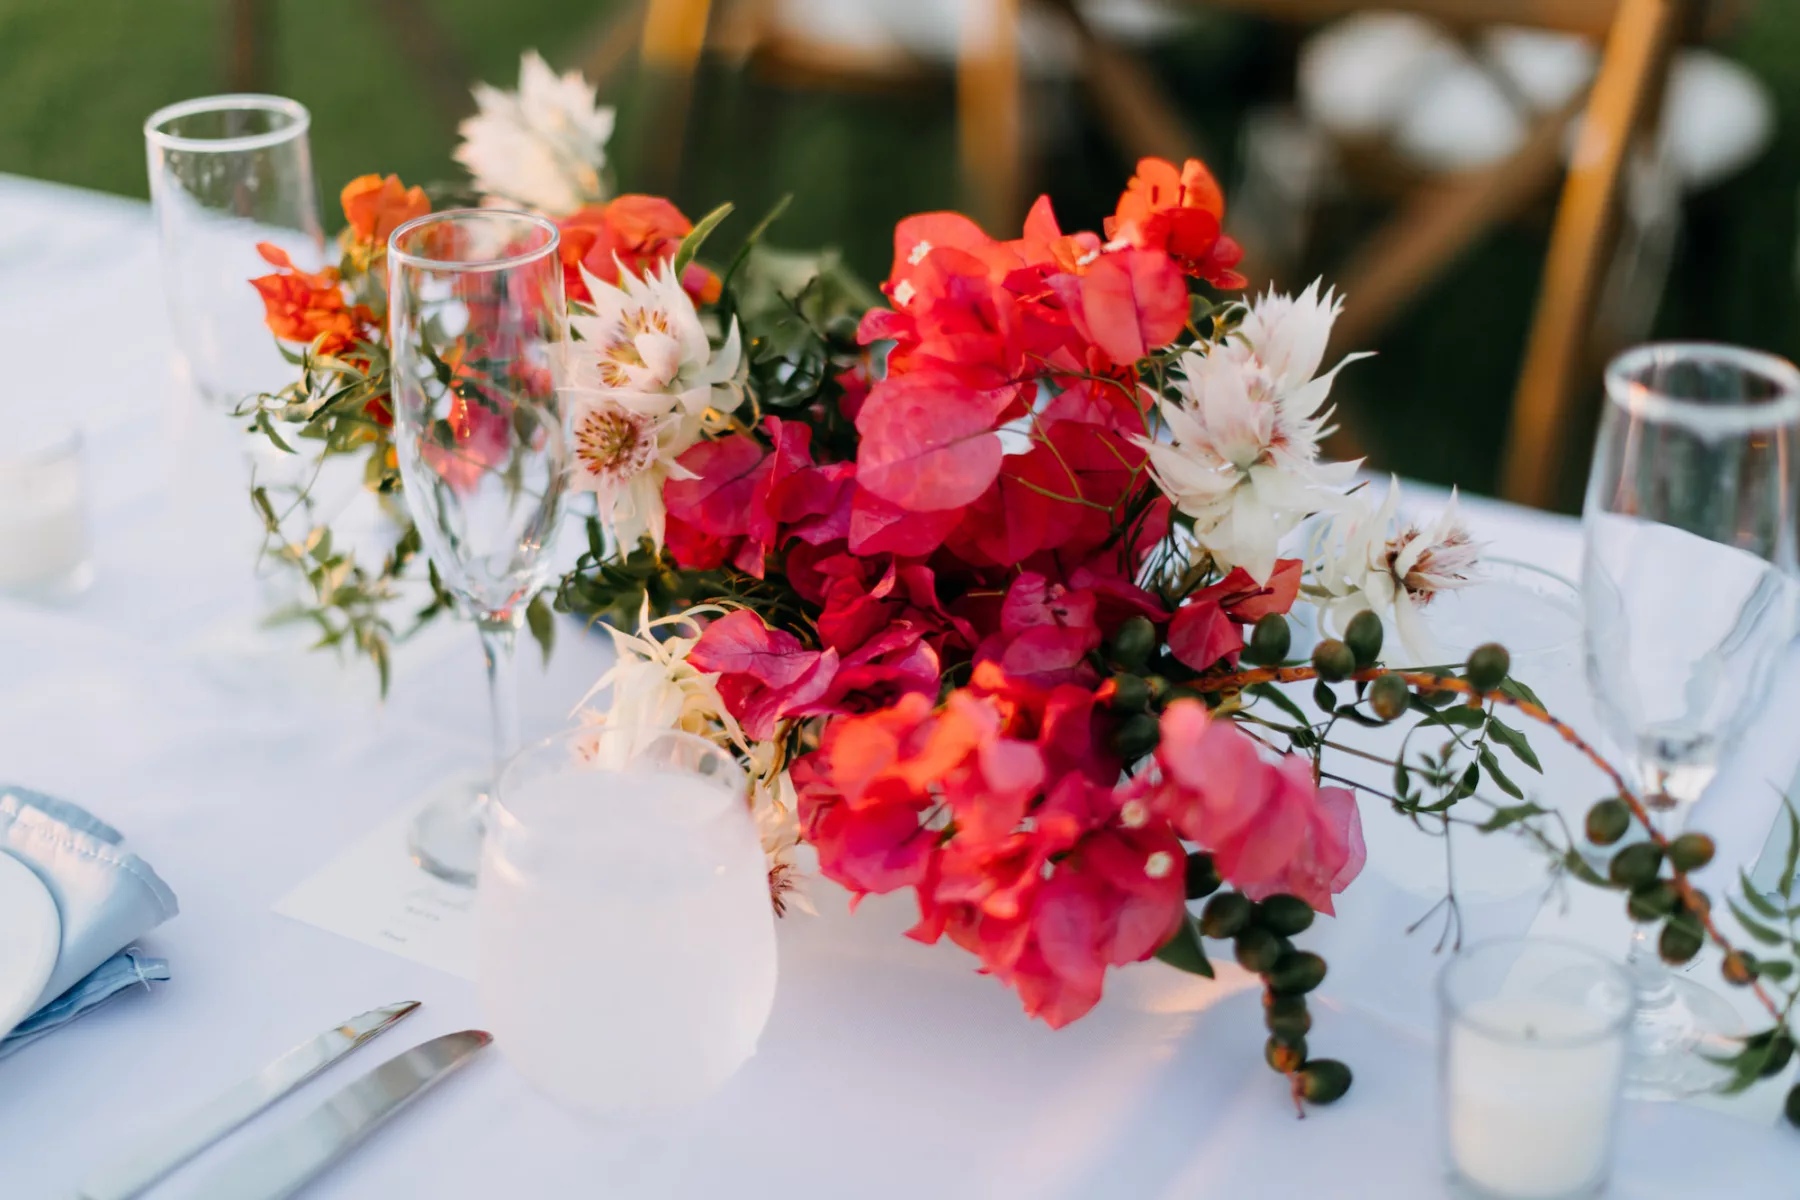 Pink Bougainvillea and White Protea Old Florida Wedding Reception Centerpiece Inspiration